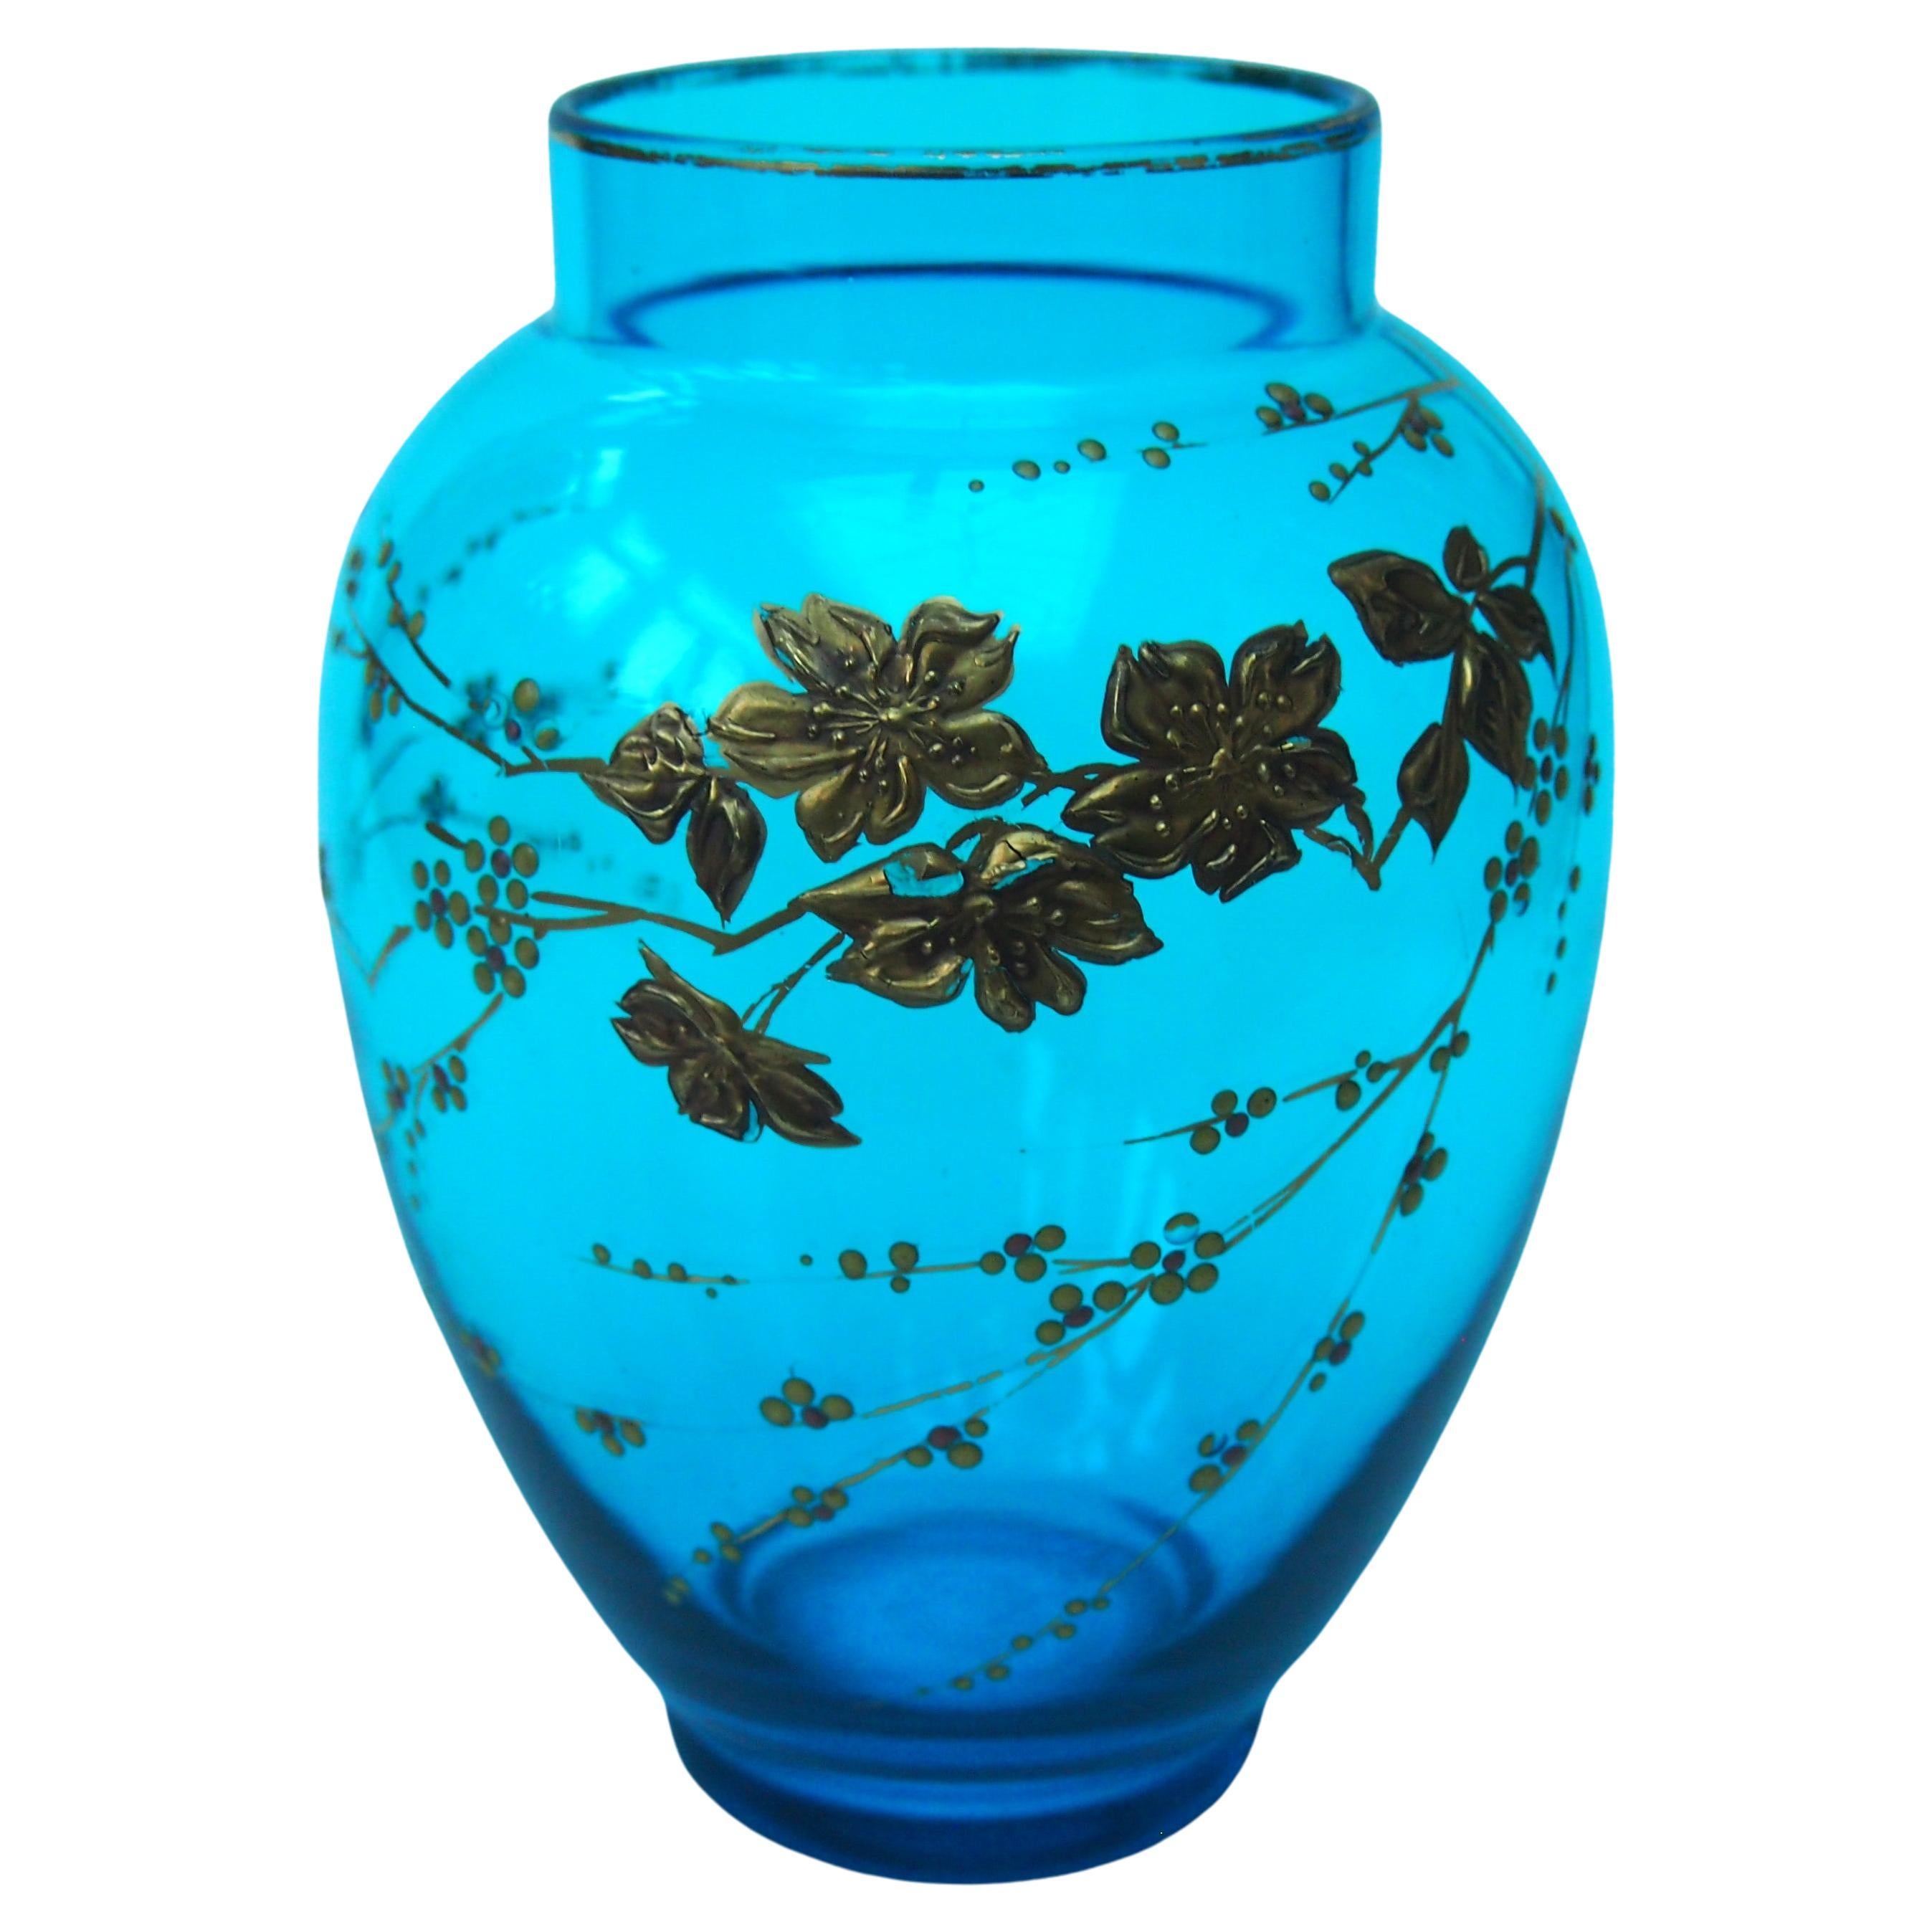 Fabulous Aesthetic Movement Blue Baccarat Crystal glass Prunus Gilded Vase c1890 For Sale